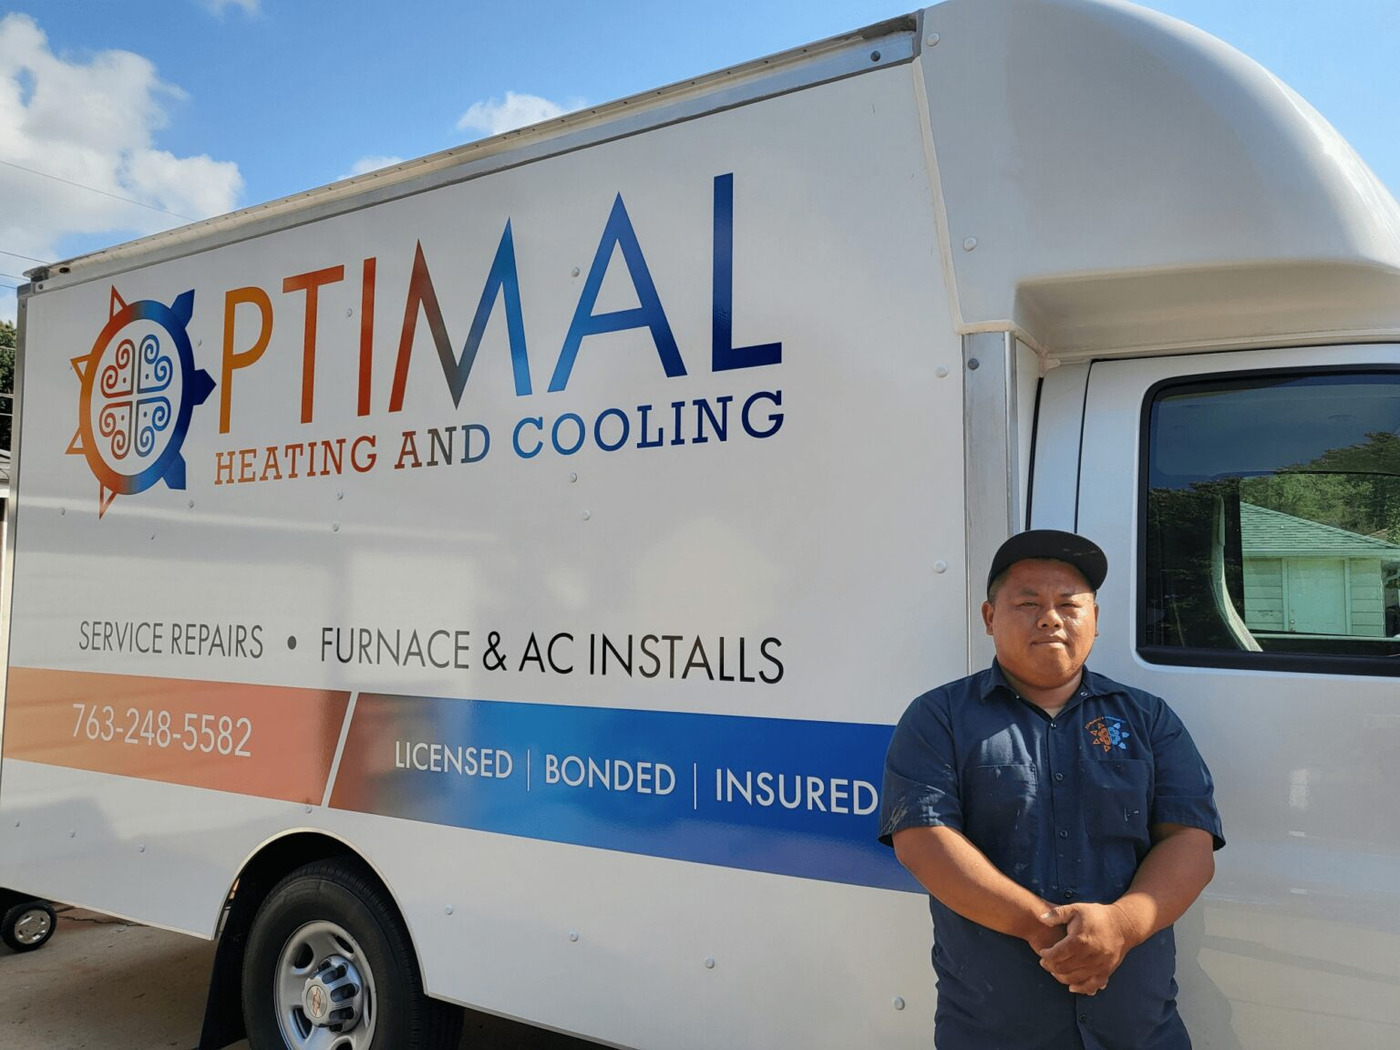 Optimal Heating and Cooling has served the Brooklyn Center community for over 10 years, offering top-notch HVAC services.